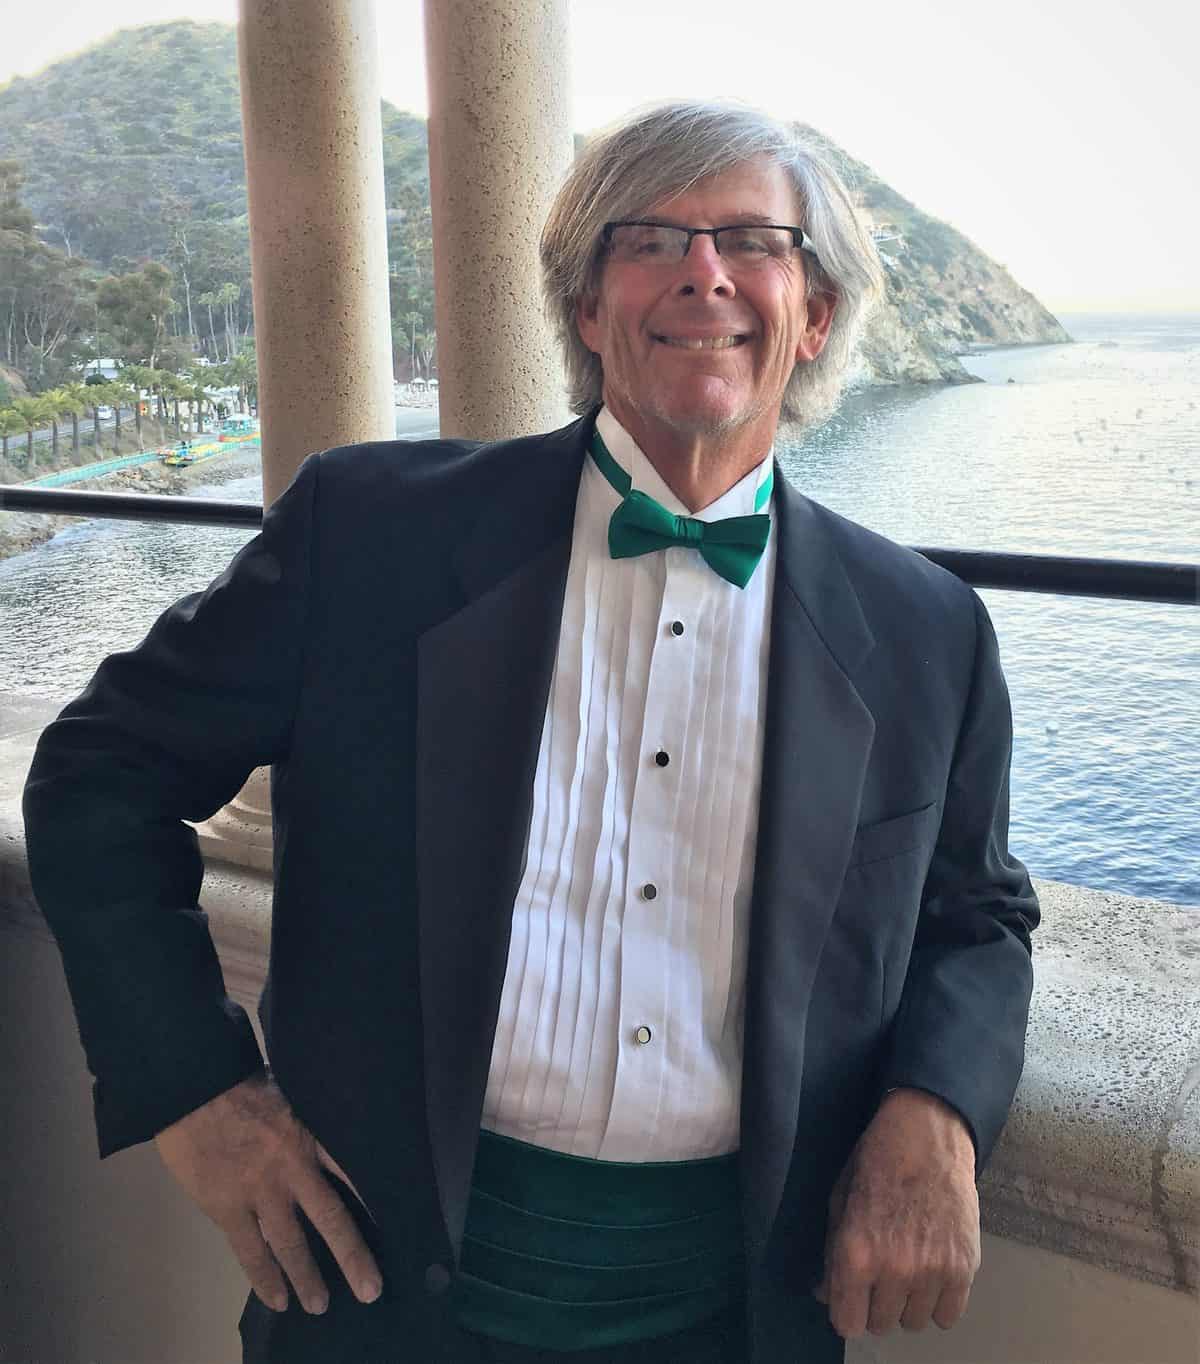 John Meyers in a tuxedo at the Conservancy Ball in Avalon